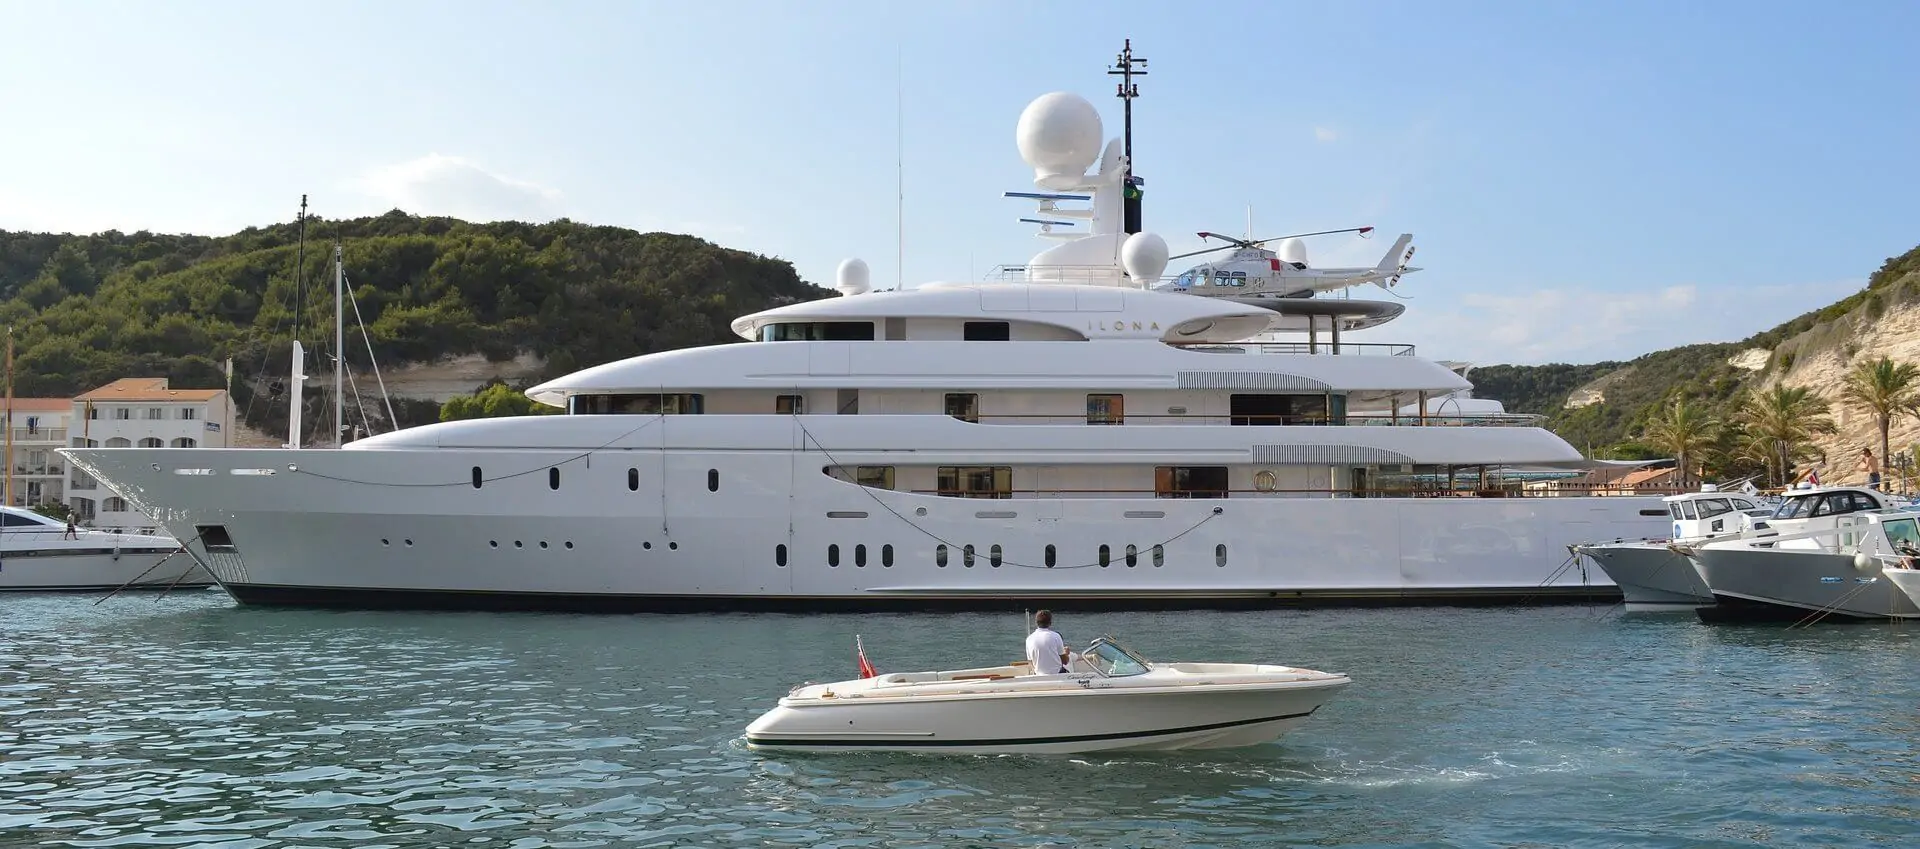 Advantages and disadvantages of living on a yacht